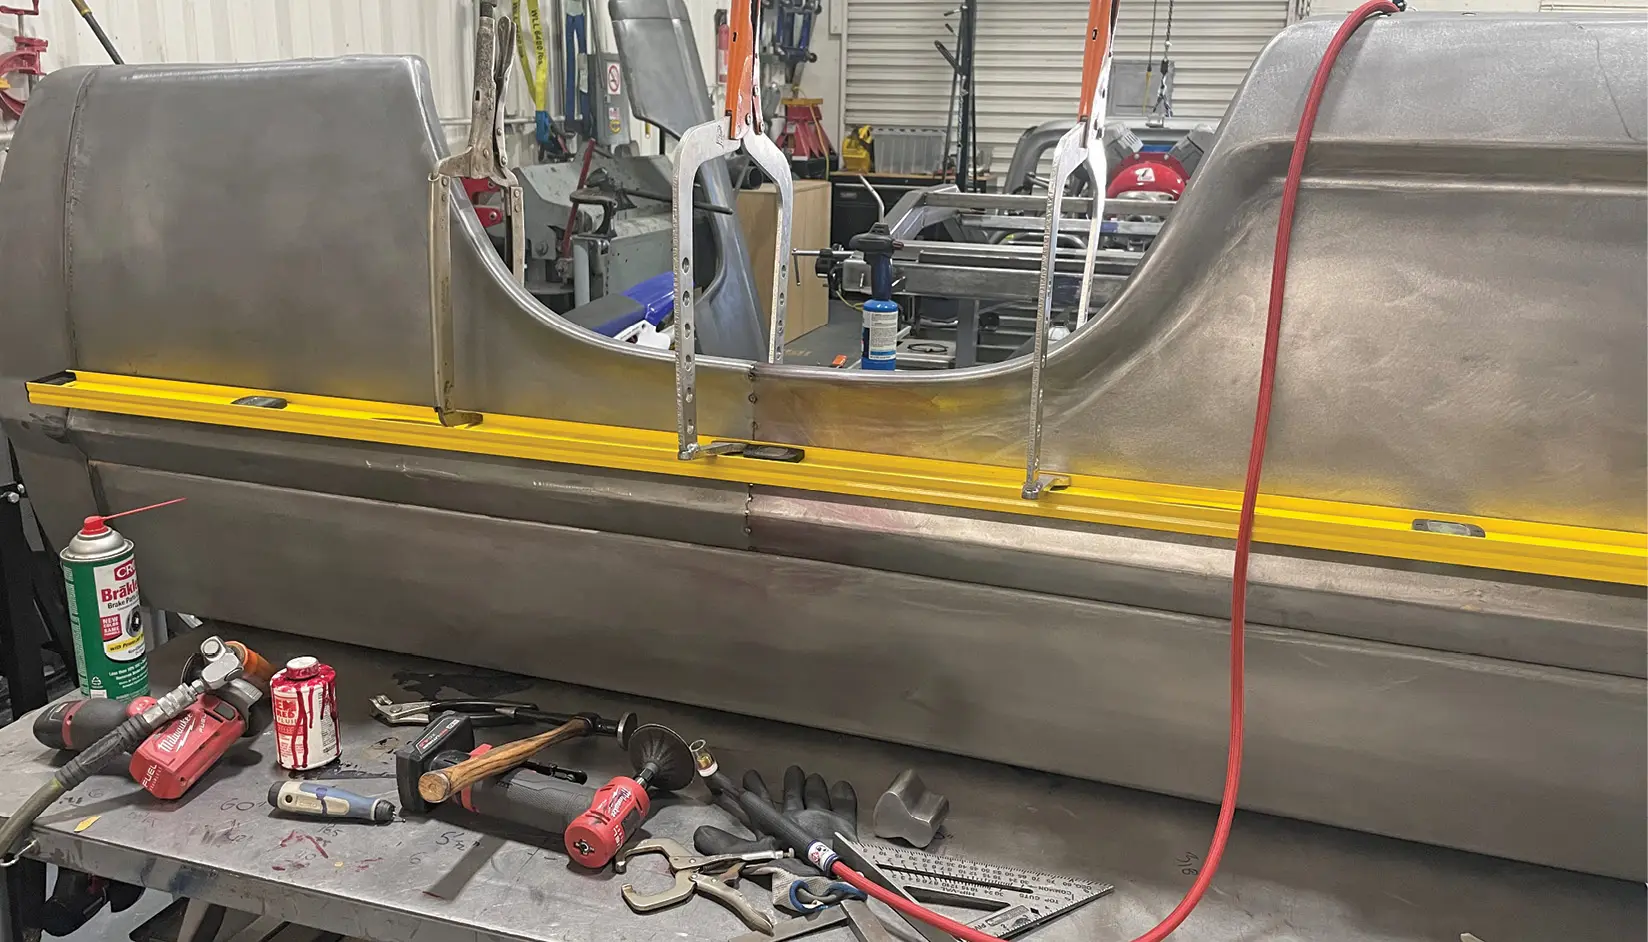 After cutting and fitting, the bed sections are clamped together with a rigid straightedge as they are tack-welded back together.